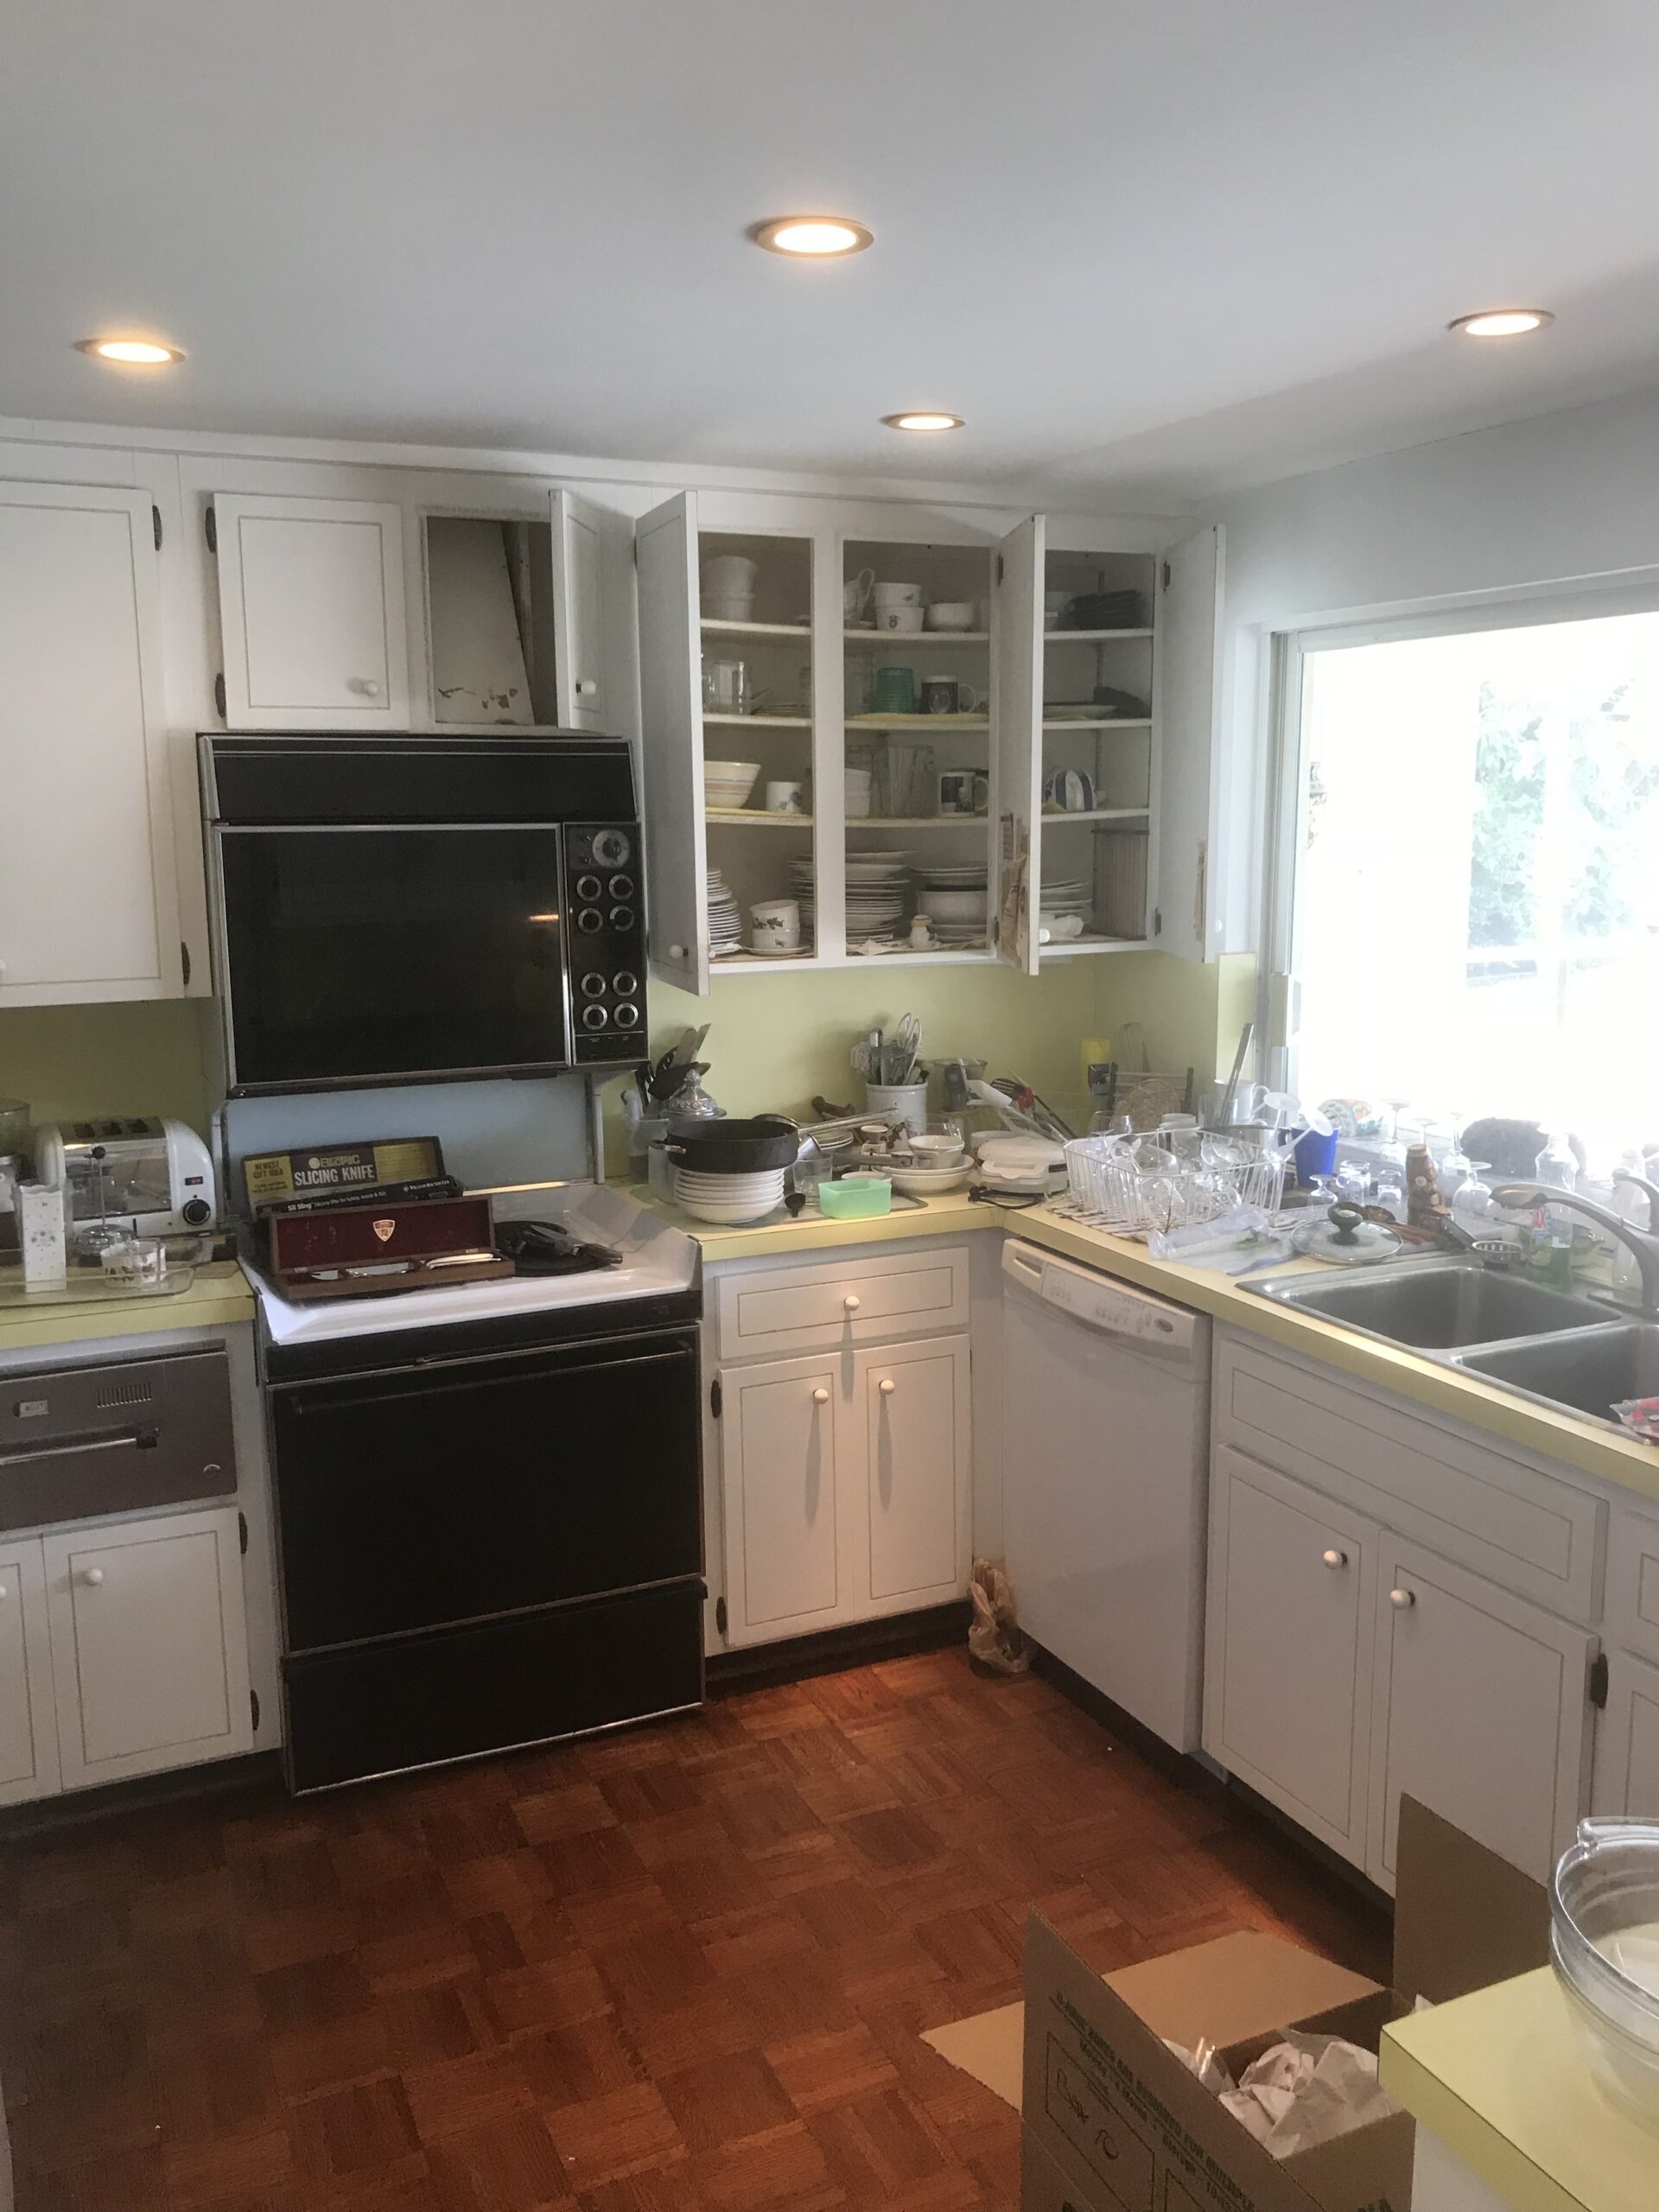 The vintage kitchen ;). Total remodel (still working on the layout) but hoping for a large island and potentially carrying the glass doors into the kitchen area to make the entire back of the house floor to ceiling glass doors.  